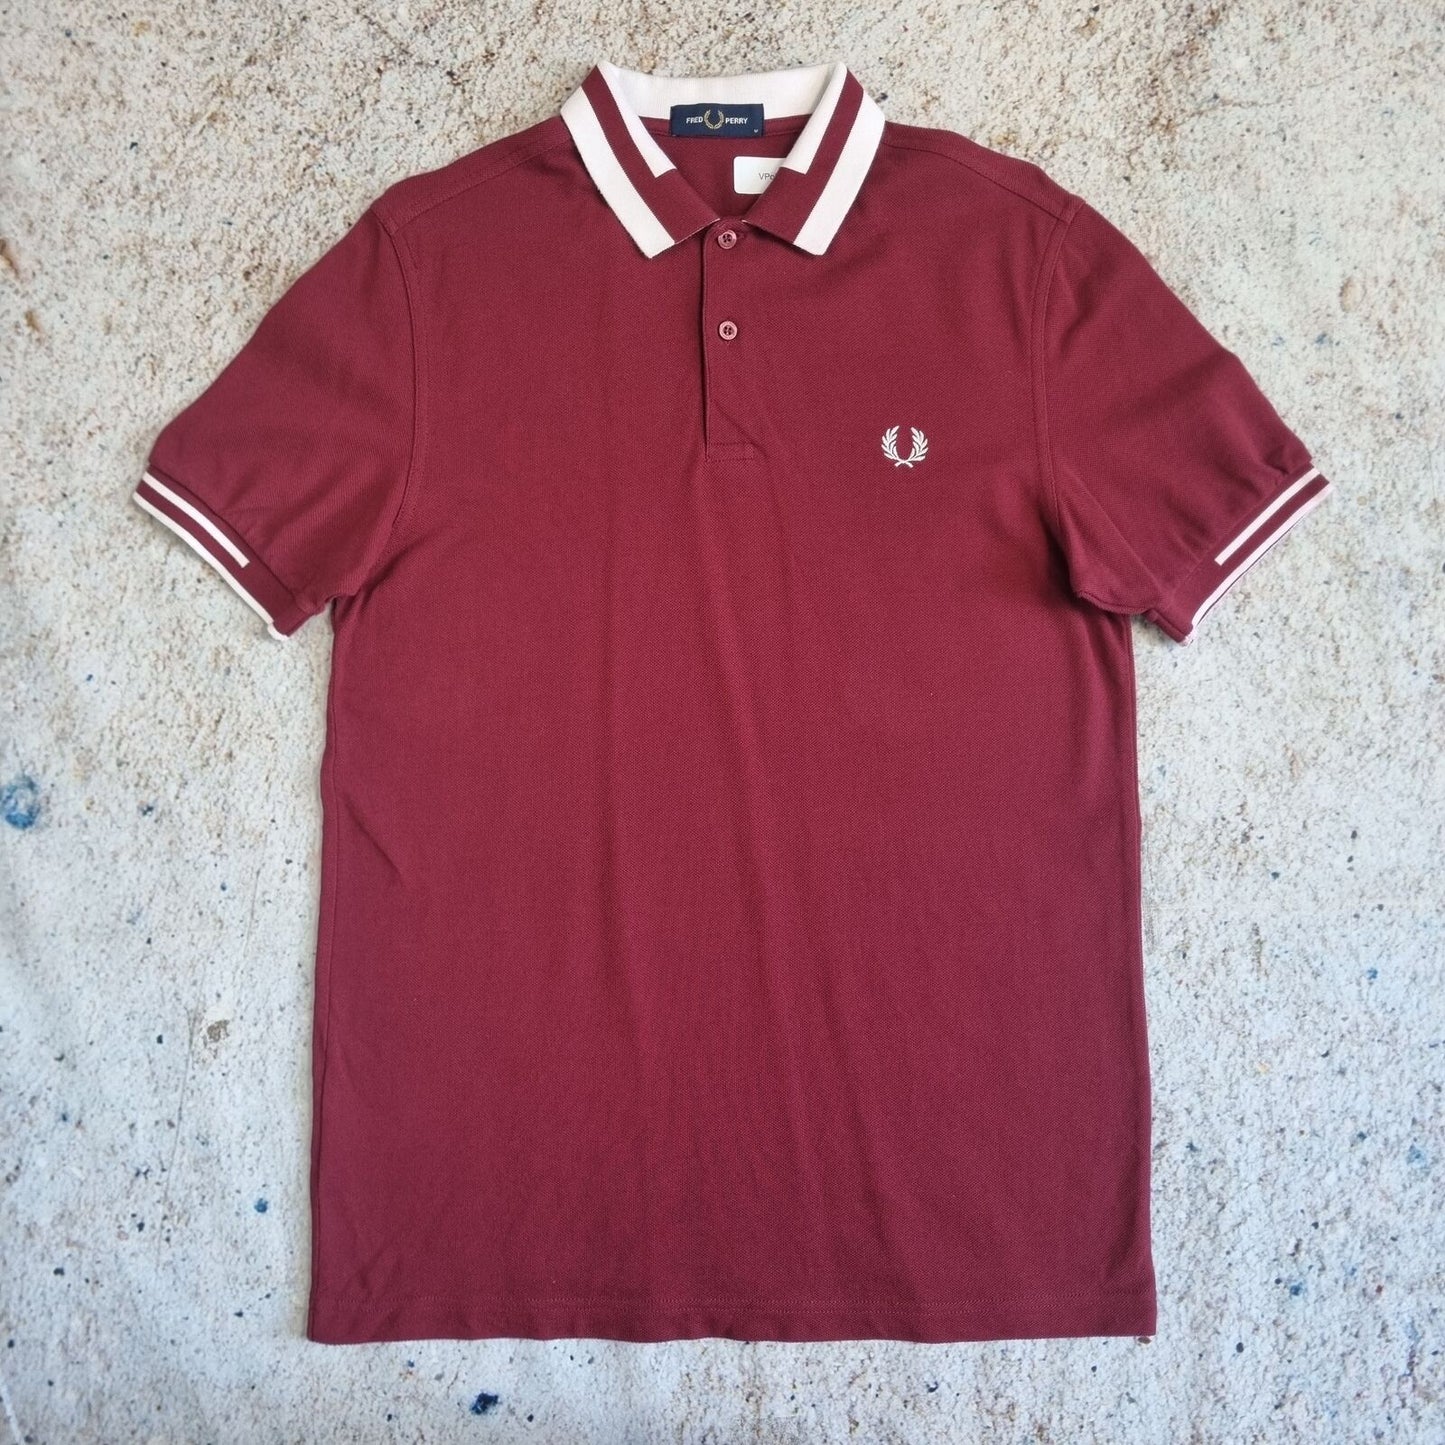 Fred Perry POLO SHIRT WHITE DETAILING - Red - Size M